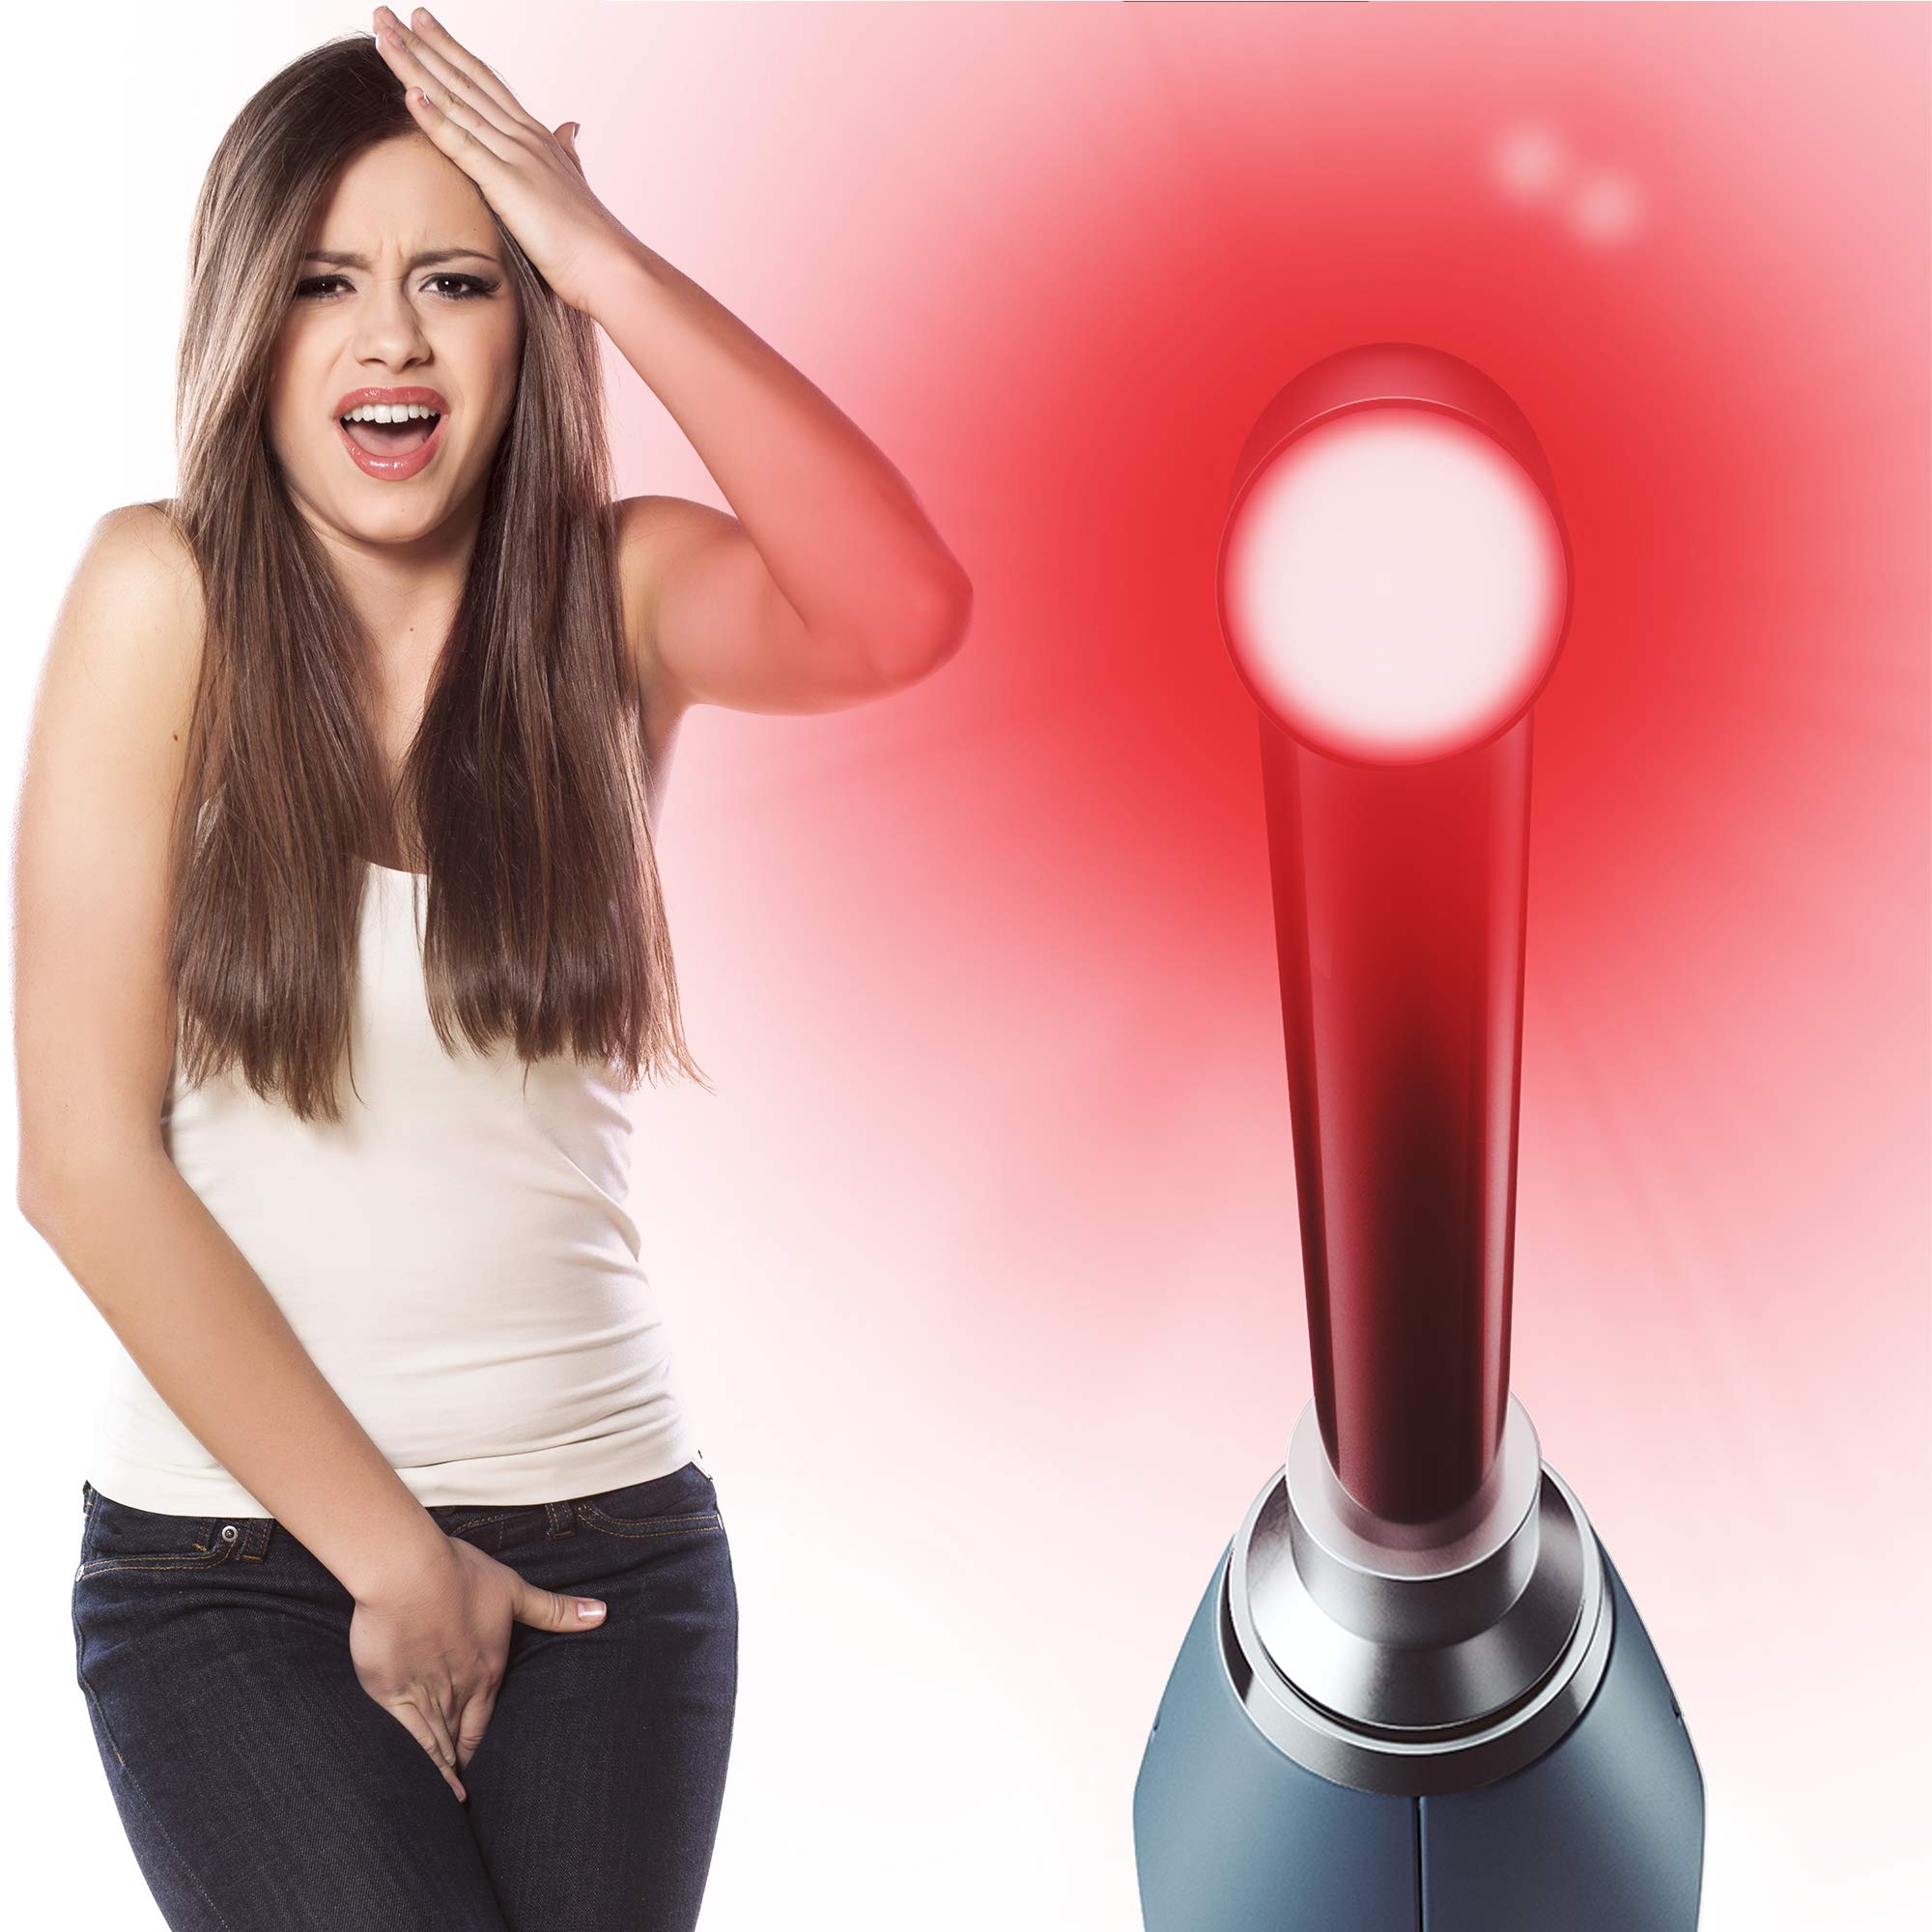 Luminance Red The Proven Genital Sore Device for Pain Relief and Sore Management